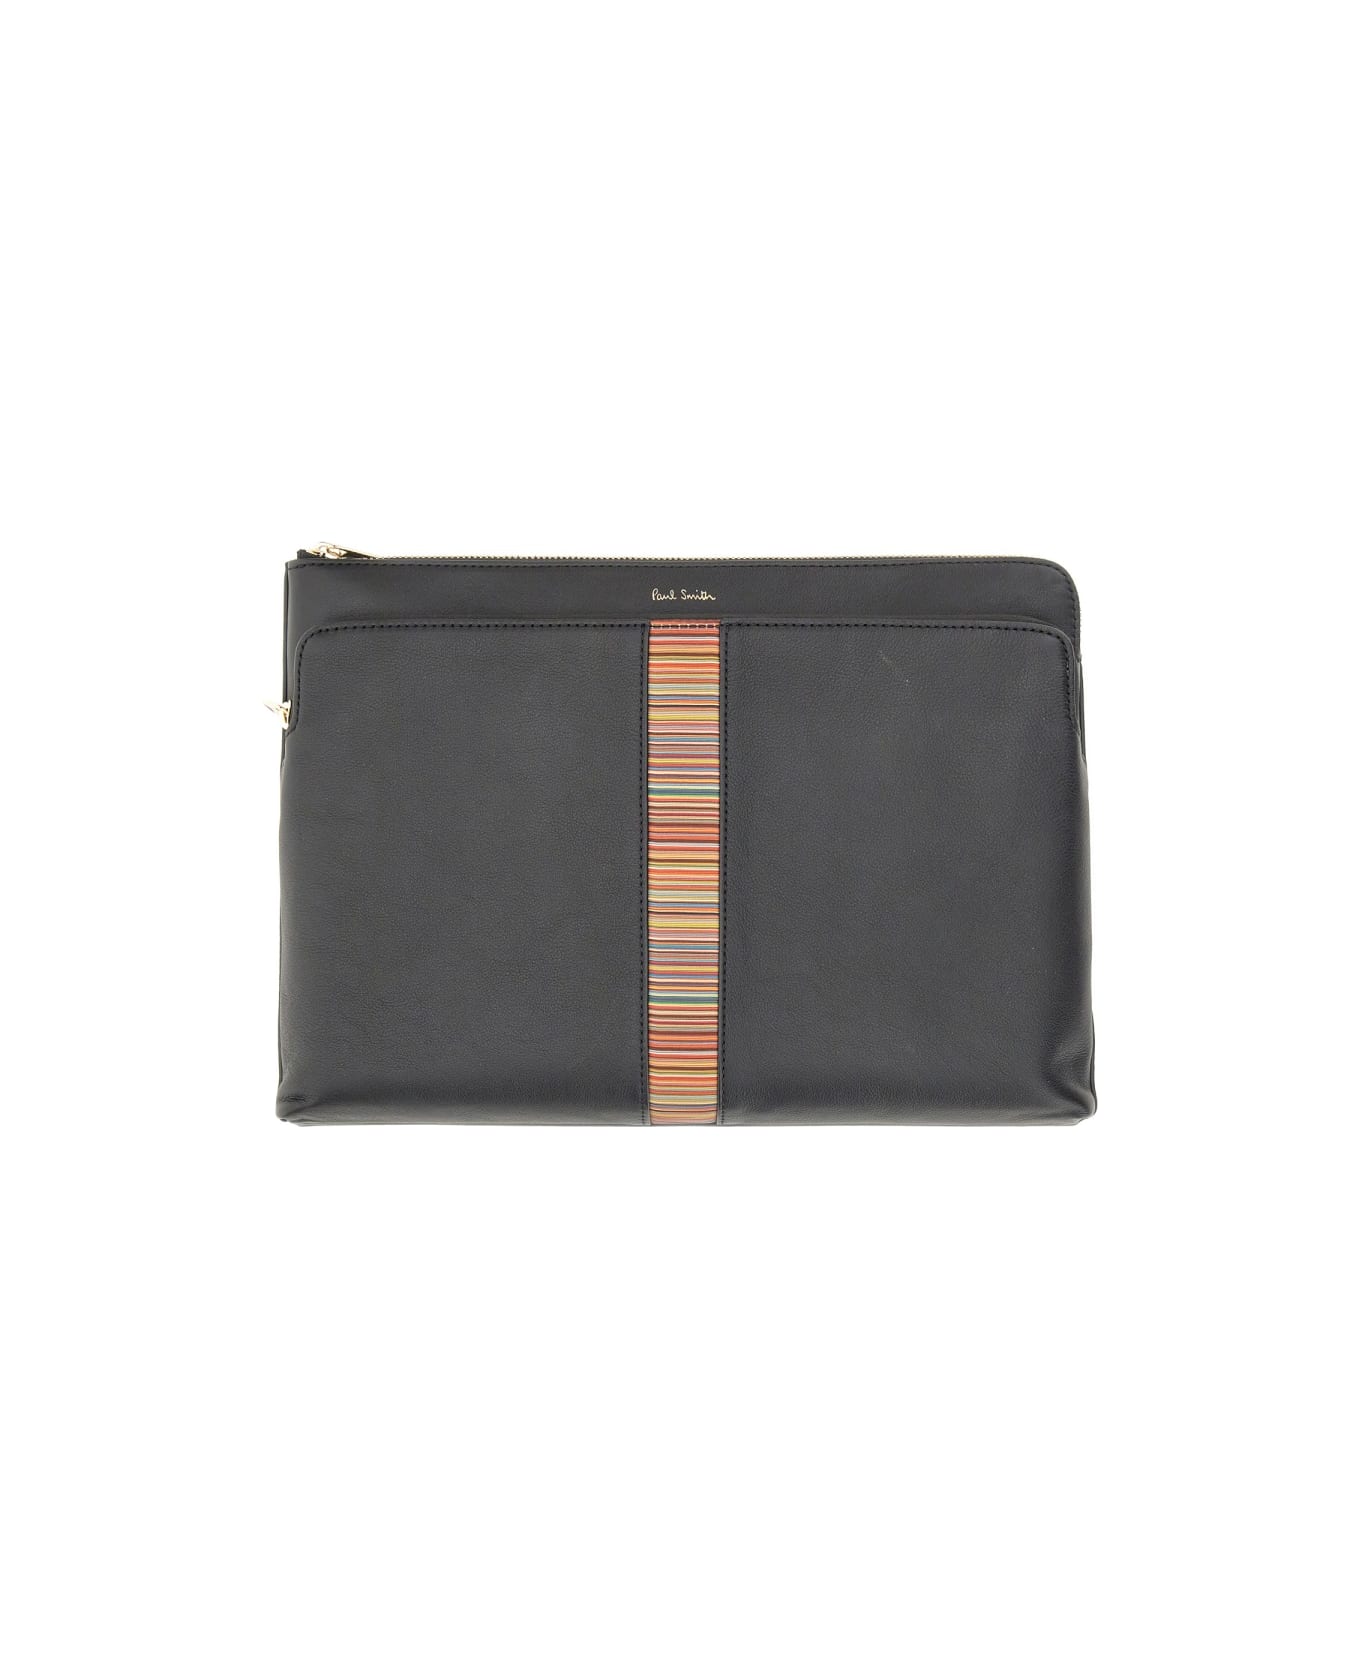 Paul Smith Leather Briefcase - BLACK